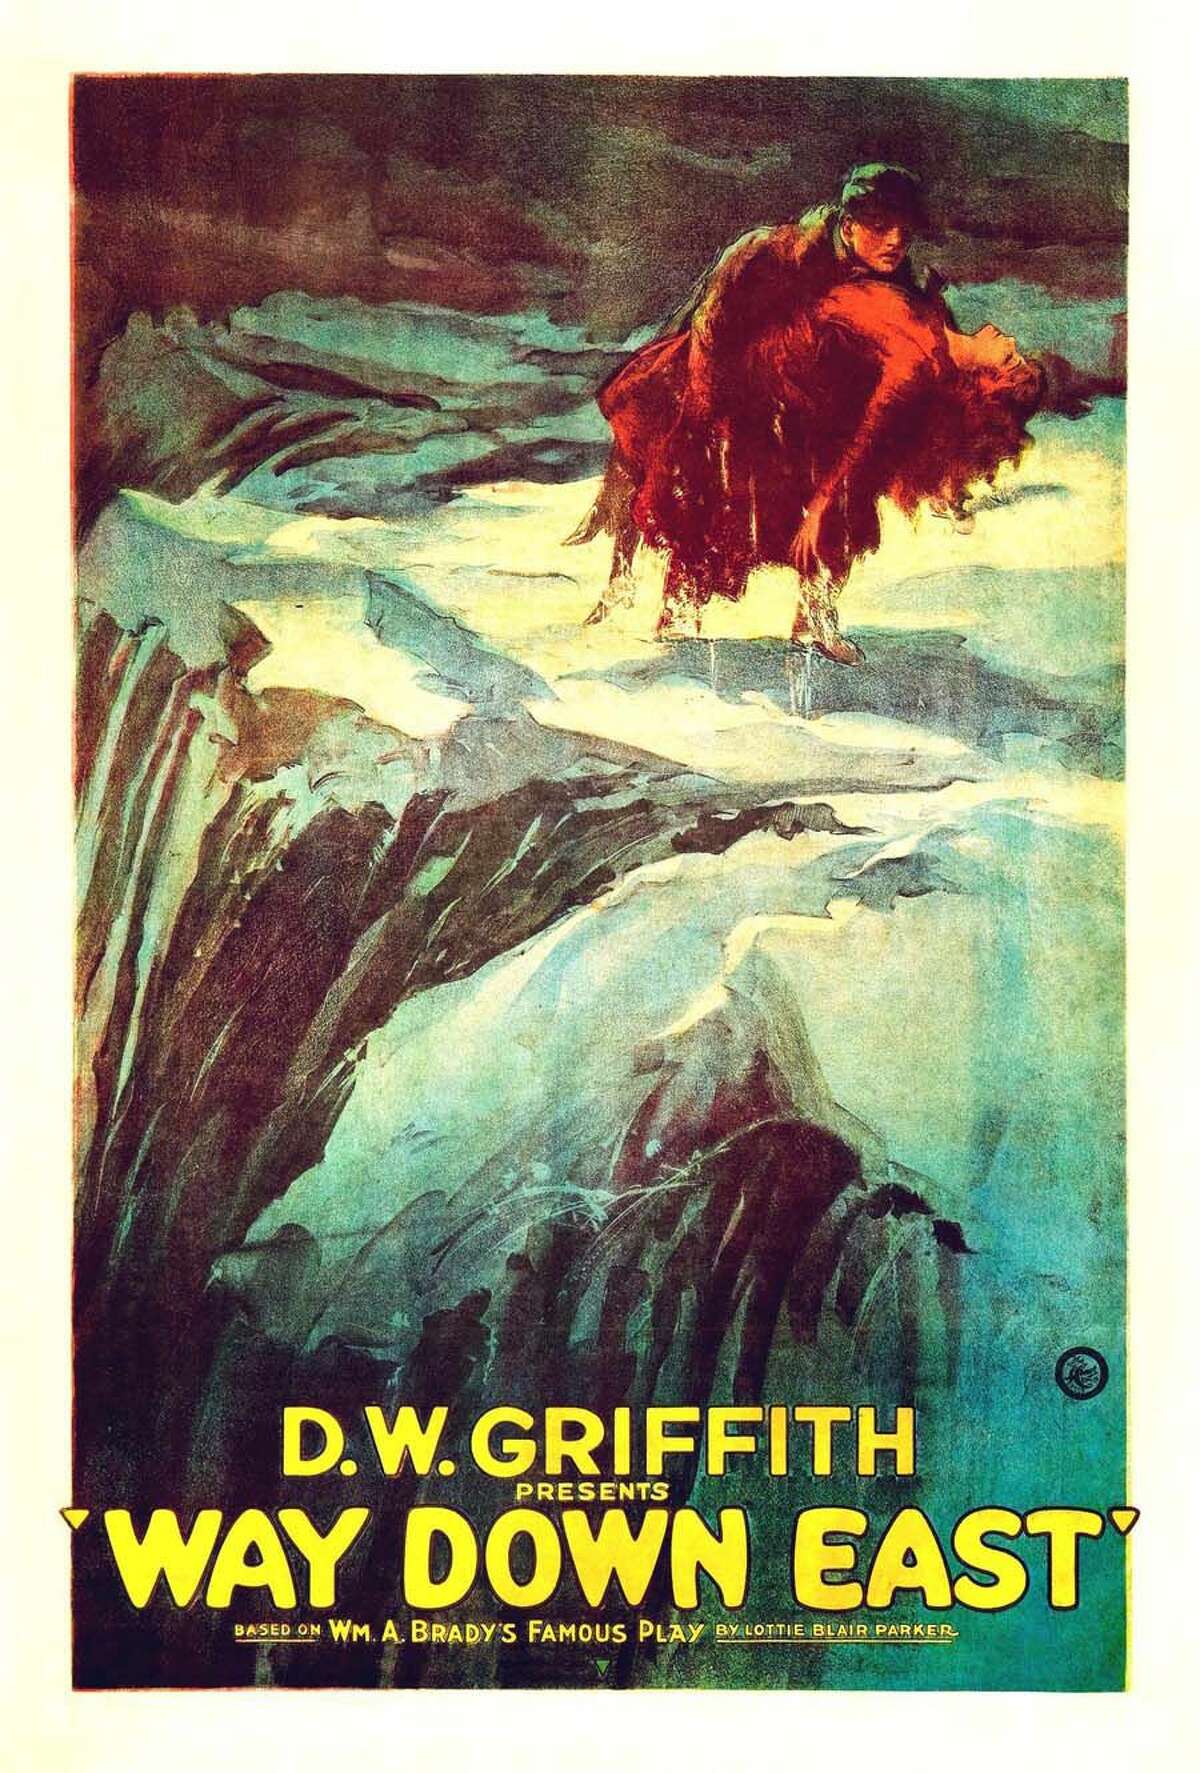 Poster for D.W. Griffith's Way Down East (1921).